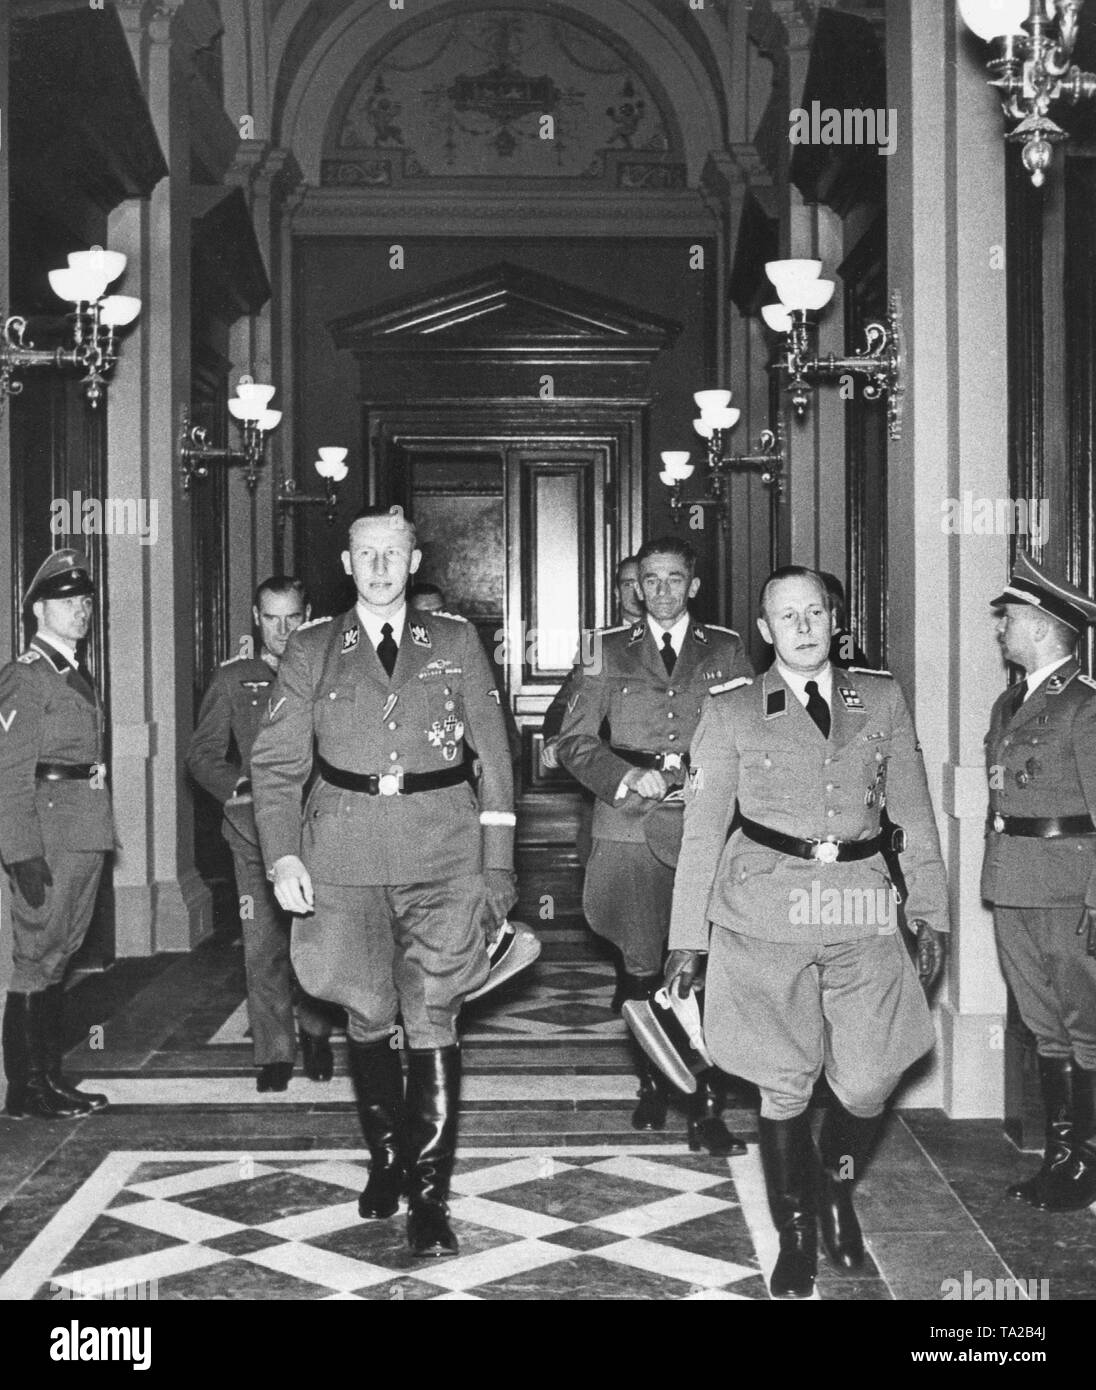 Reinhard Heydrich (front left), General of Police, arrives for a state ceremony at the Rudolfinum in Prague. Rear right, Karl Hermann Frank. Stock Photo